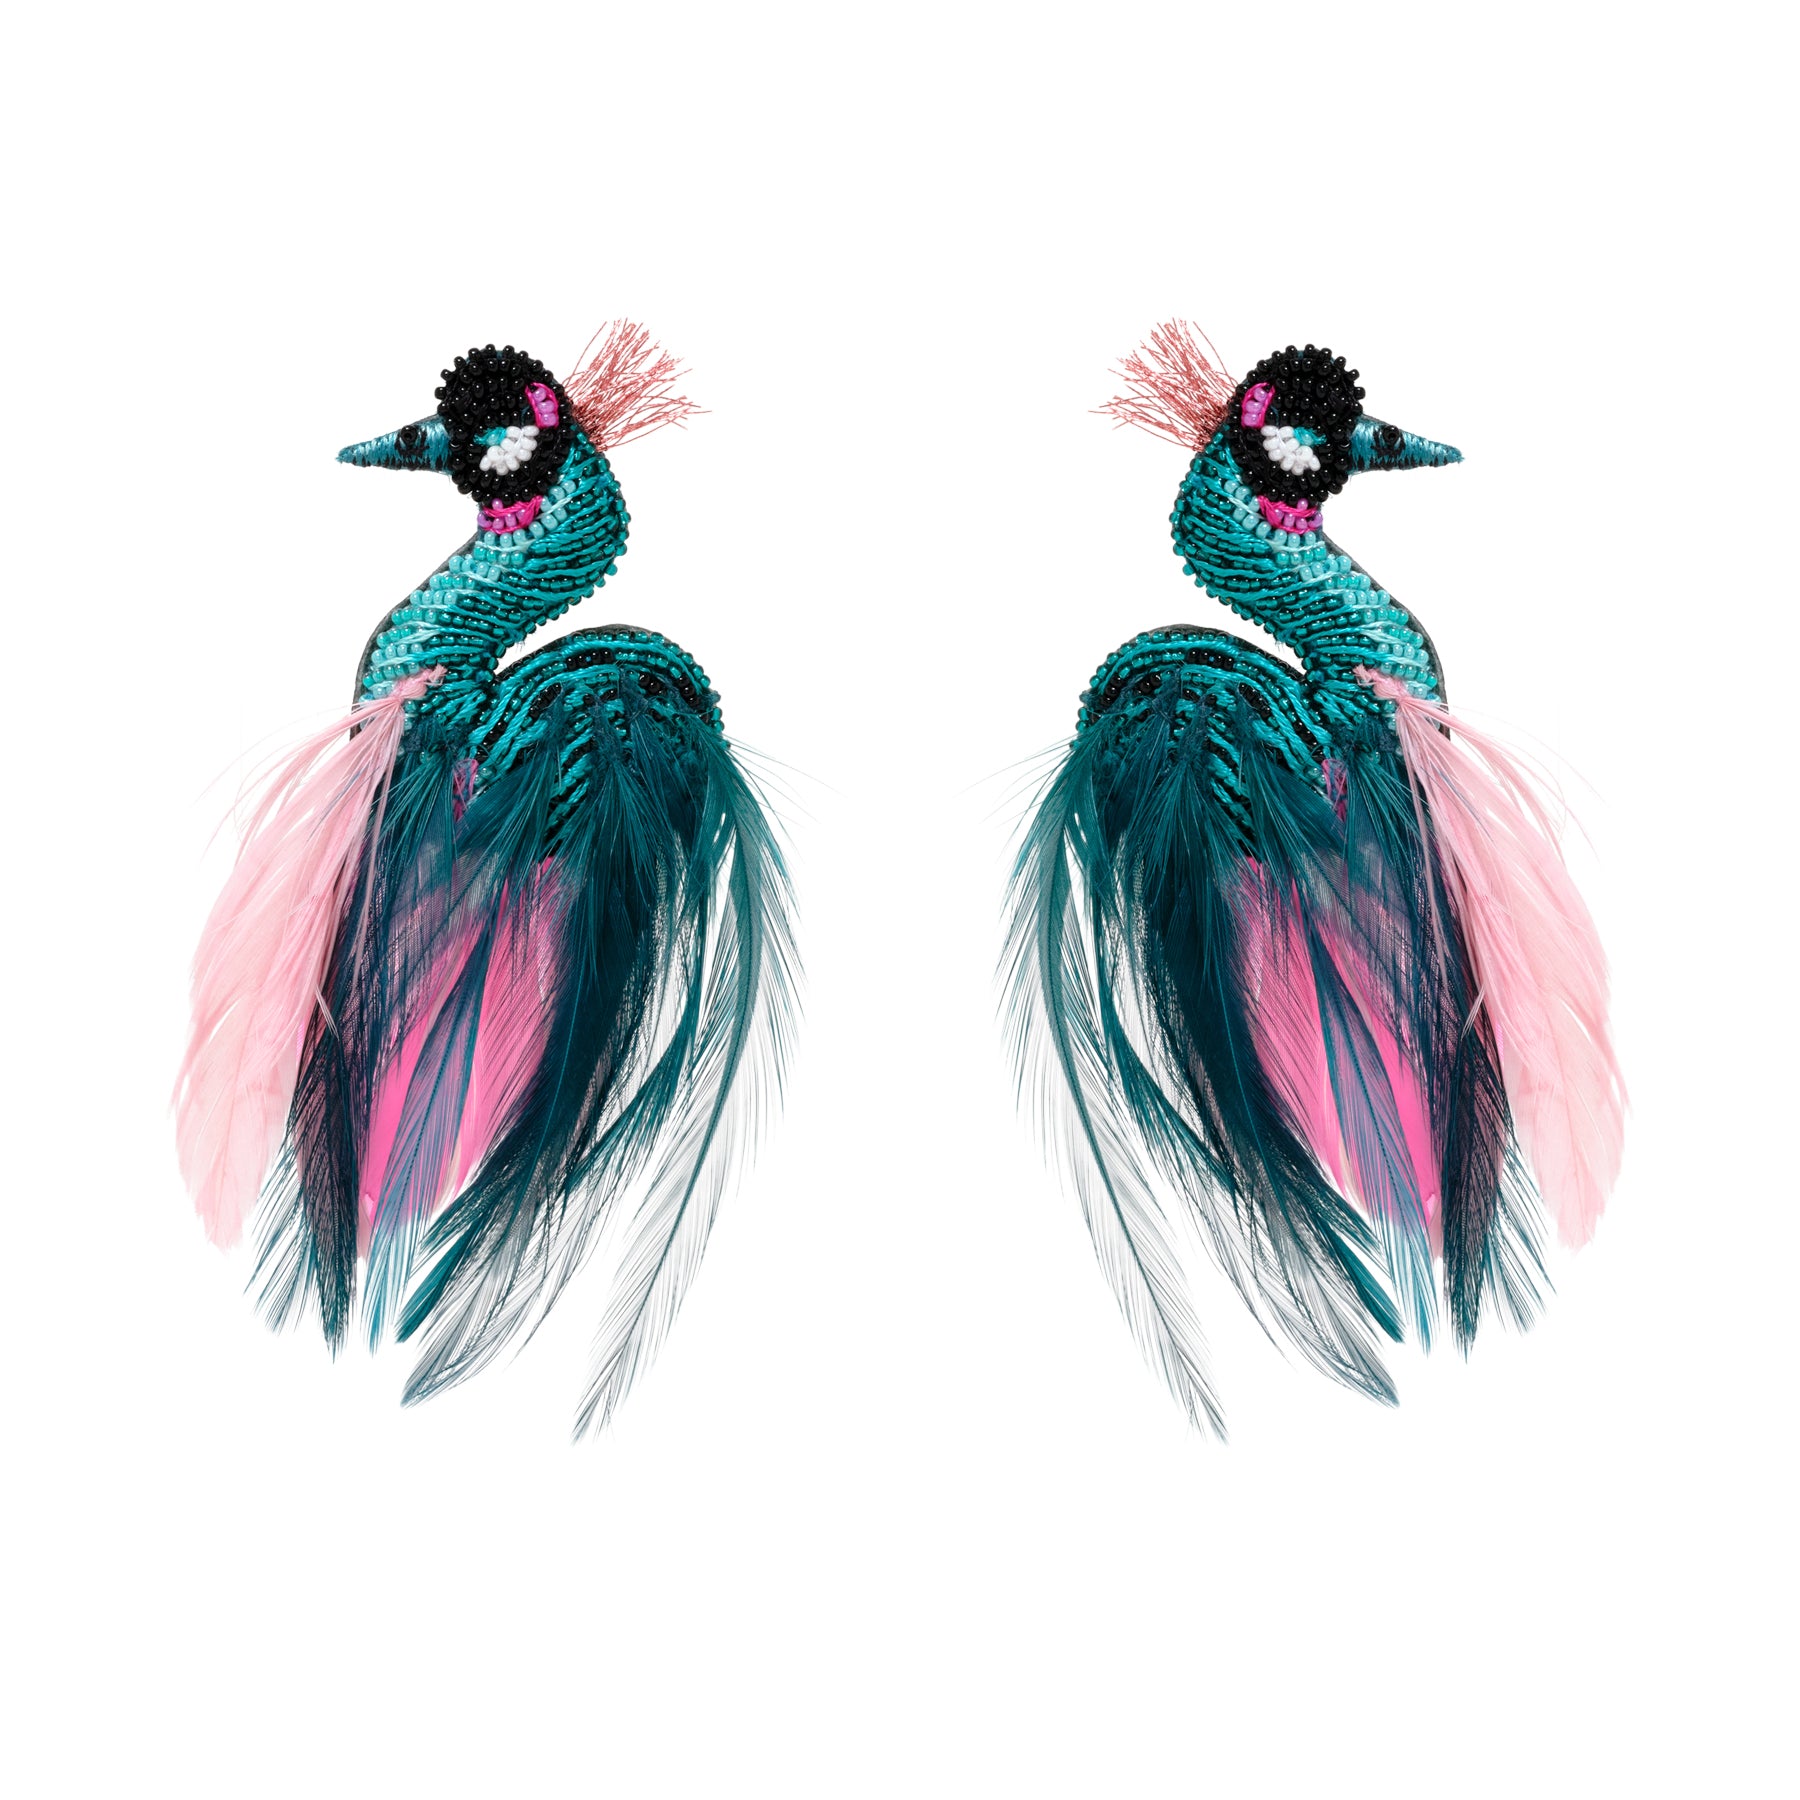 Teal and Pink Embroidered Feather Crane Bird Earrings on Flat White Surface